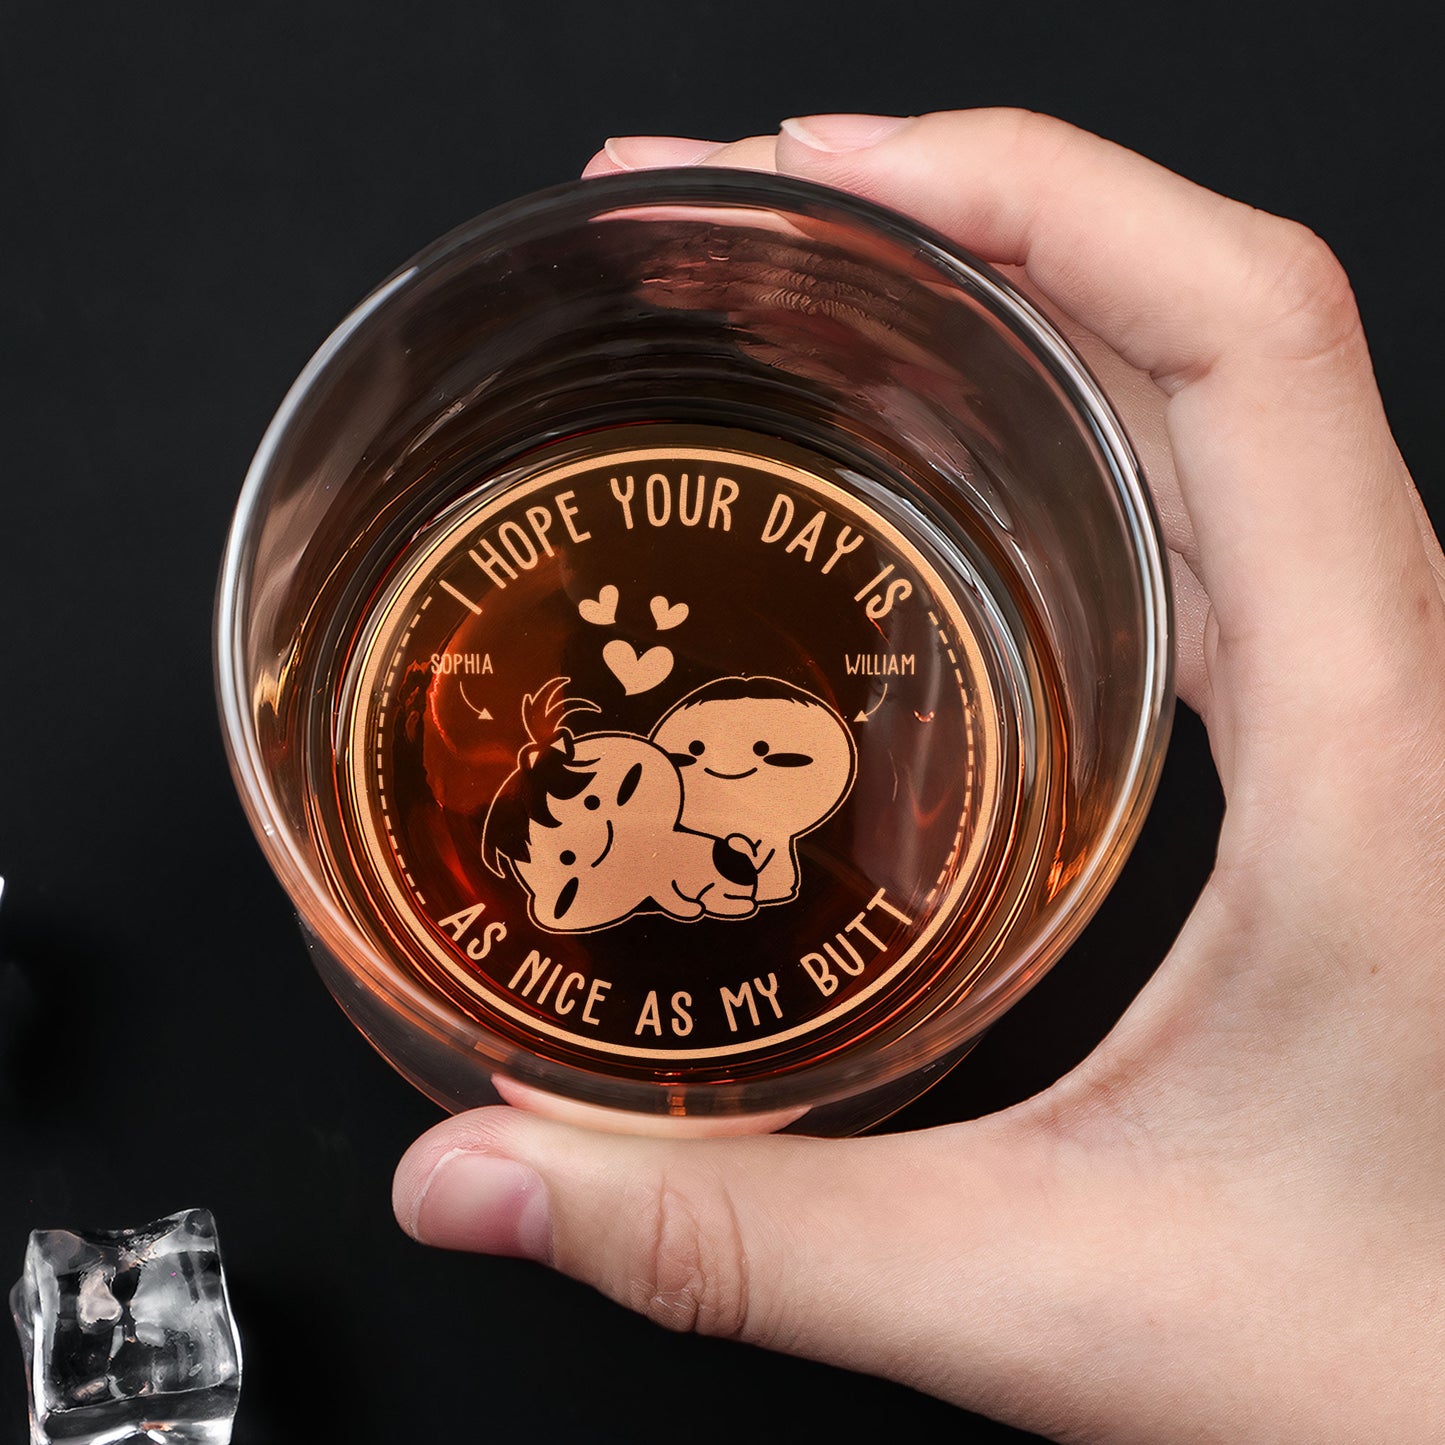 I Hope Your Day Is As Nice As My Butt - Personalized Engraved Whiskey Glass